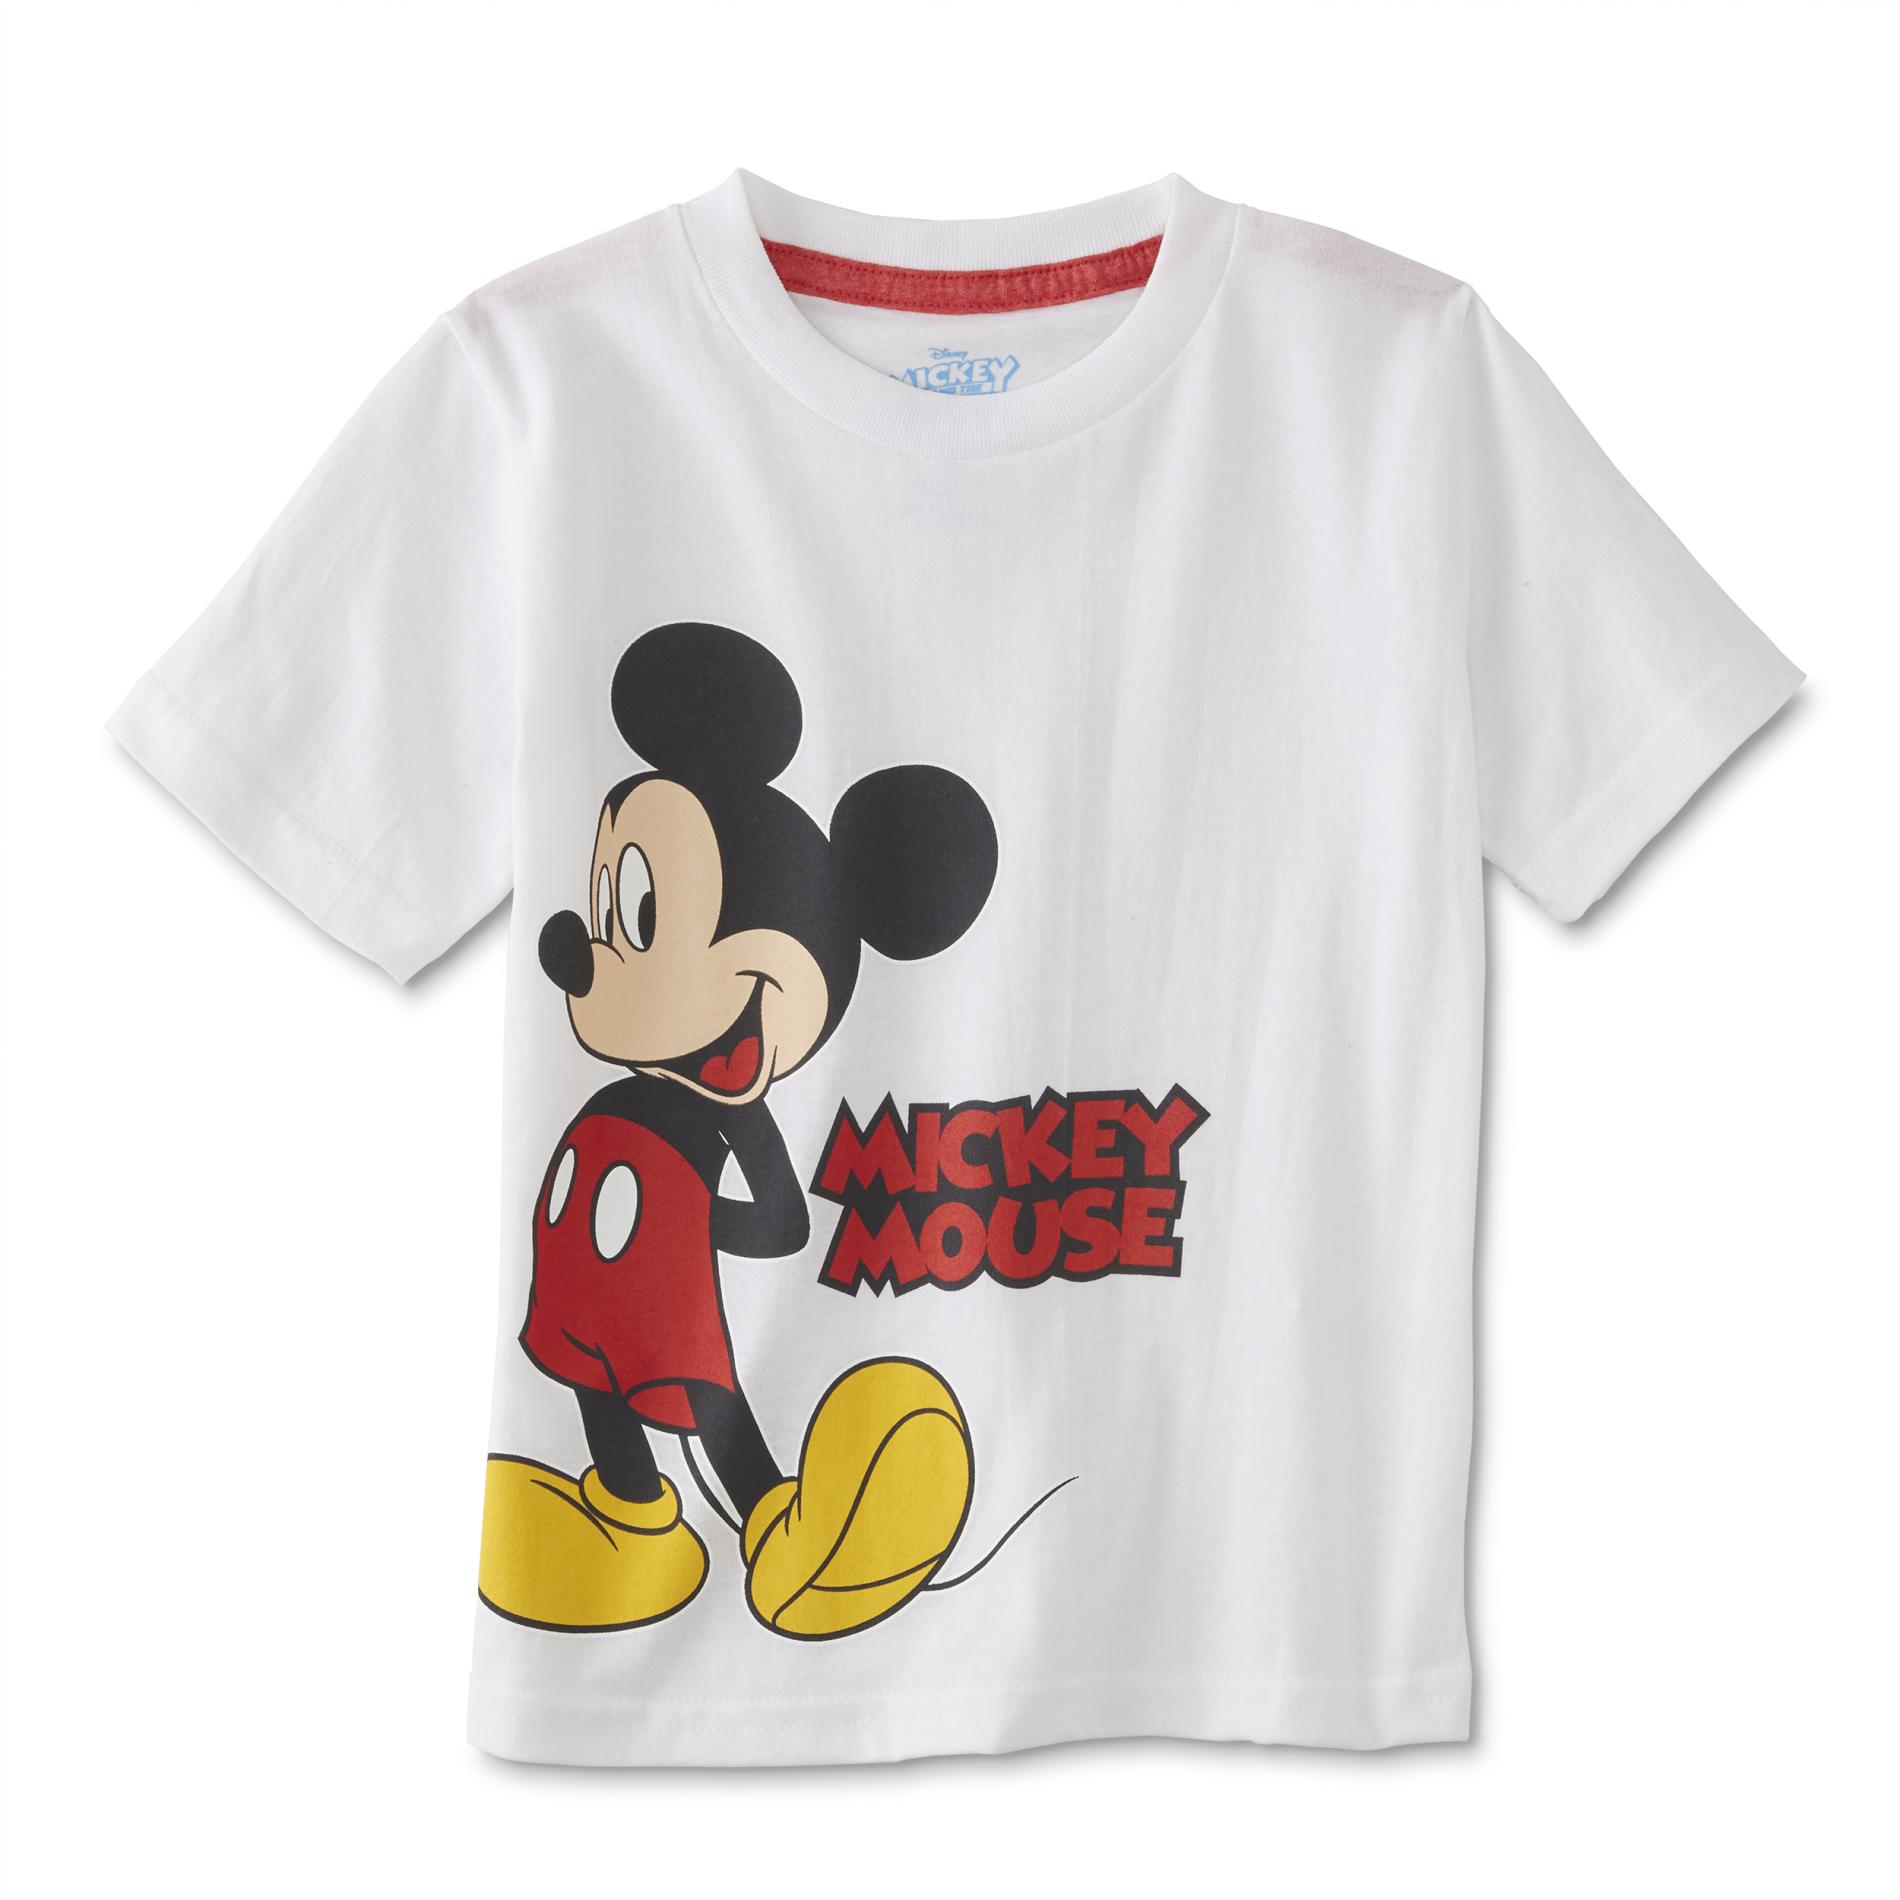 Disney Mickey Mouse Infant & Toddler Boys' Graphic T-Shirt